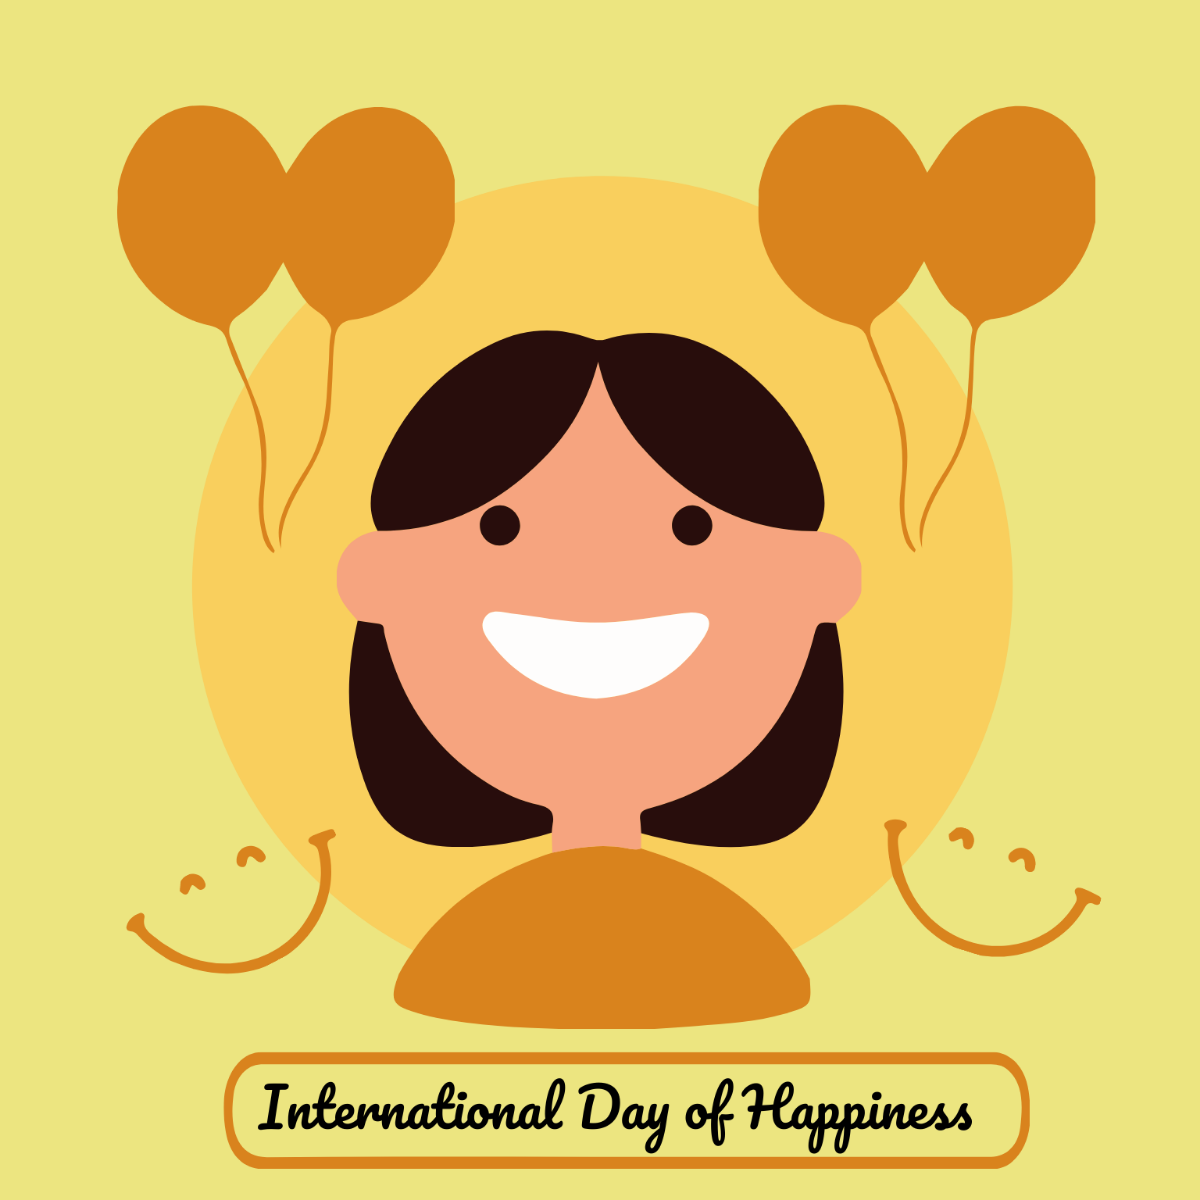 Free International Day of Happiness Celebration Vector Template